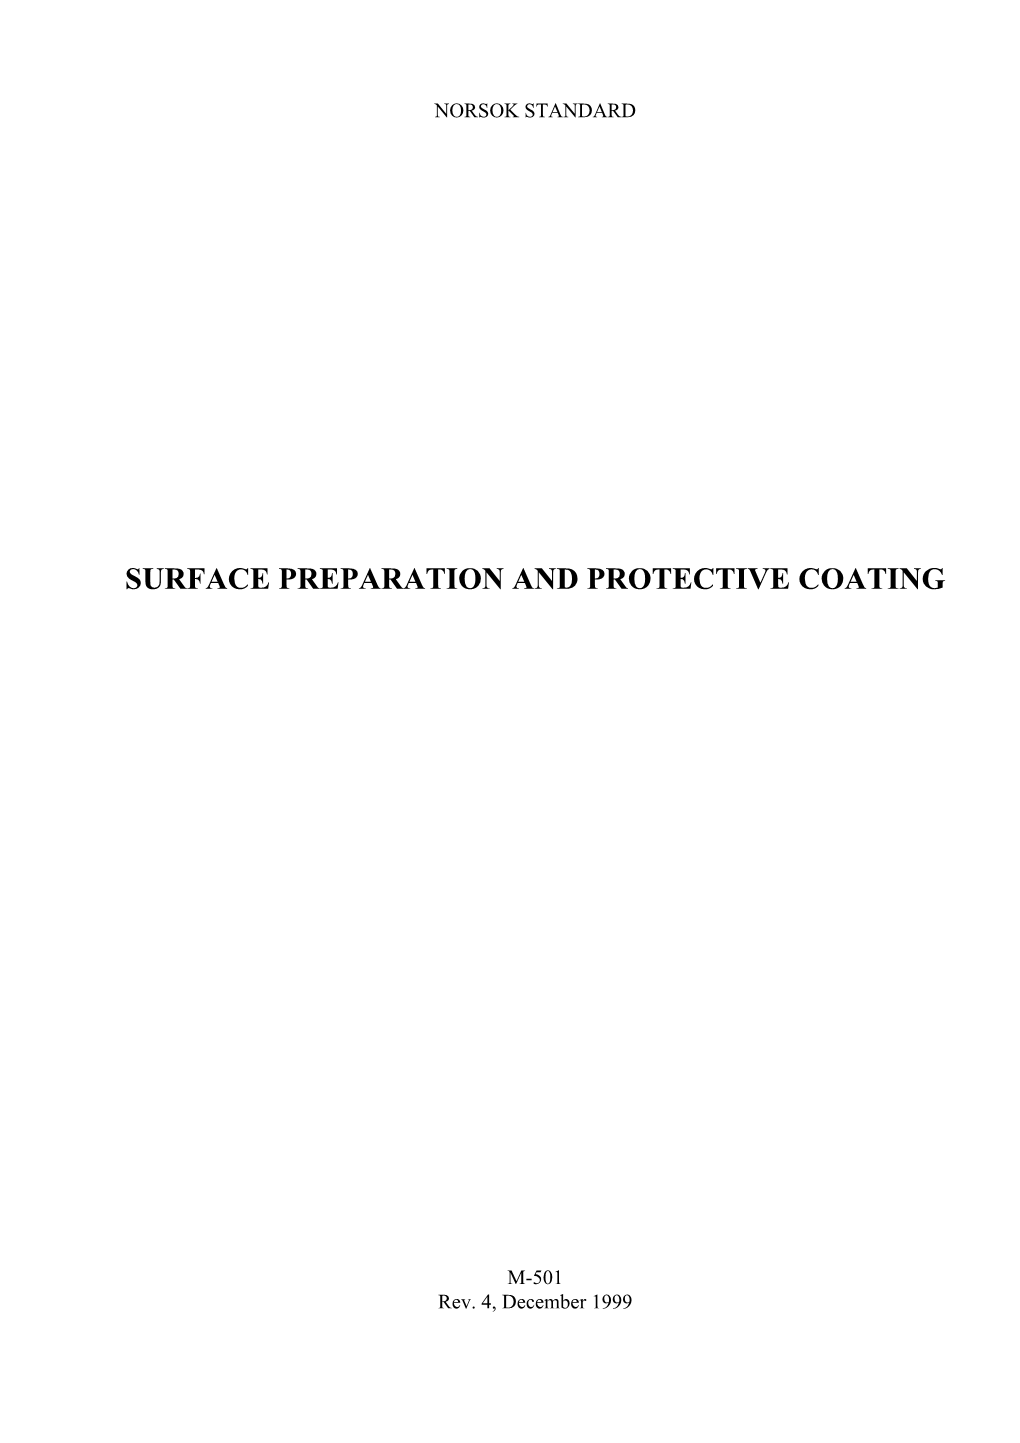 Surface Preparation and Protective Coating